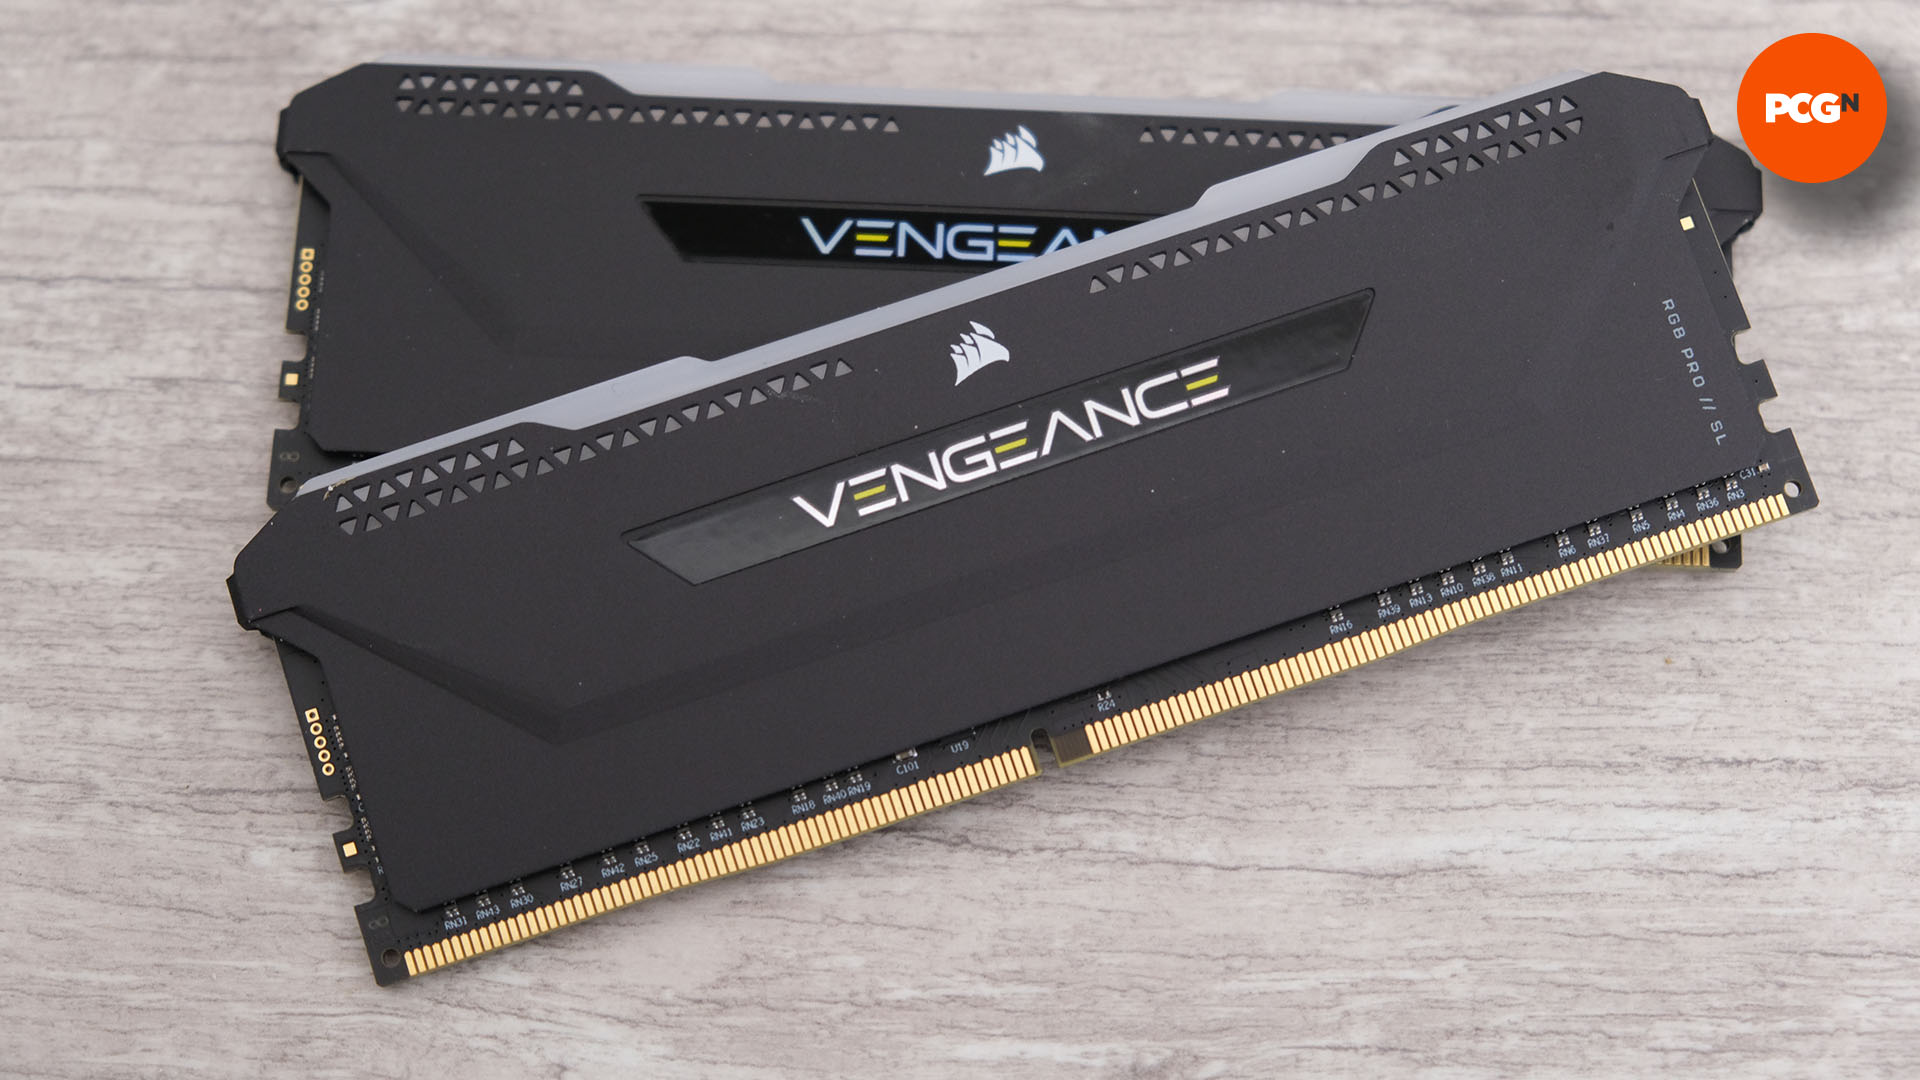 DDR4 vs DDR5 - what's the best RAM for gaming: Corsair Vengeance RGB Pro SL DDR4 memory modules